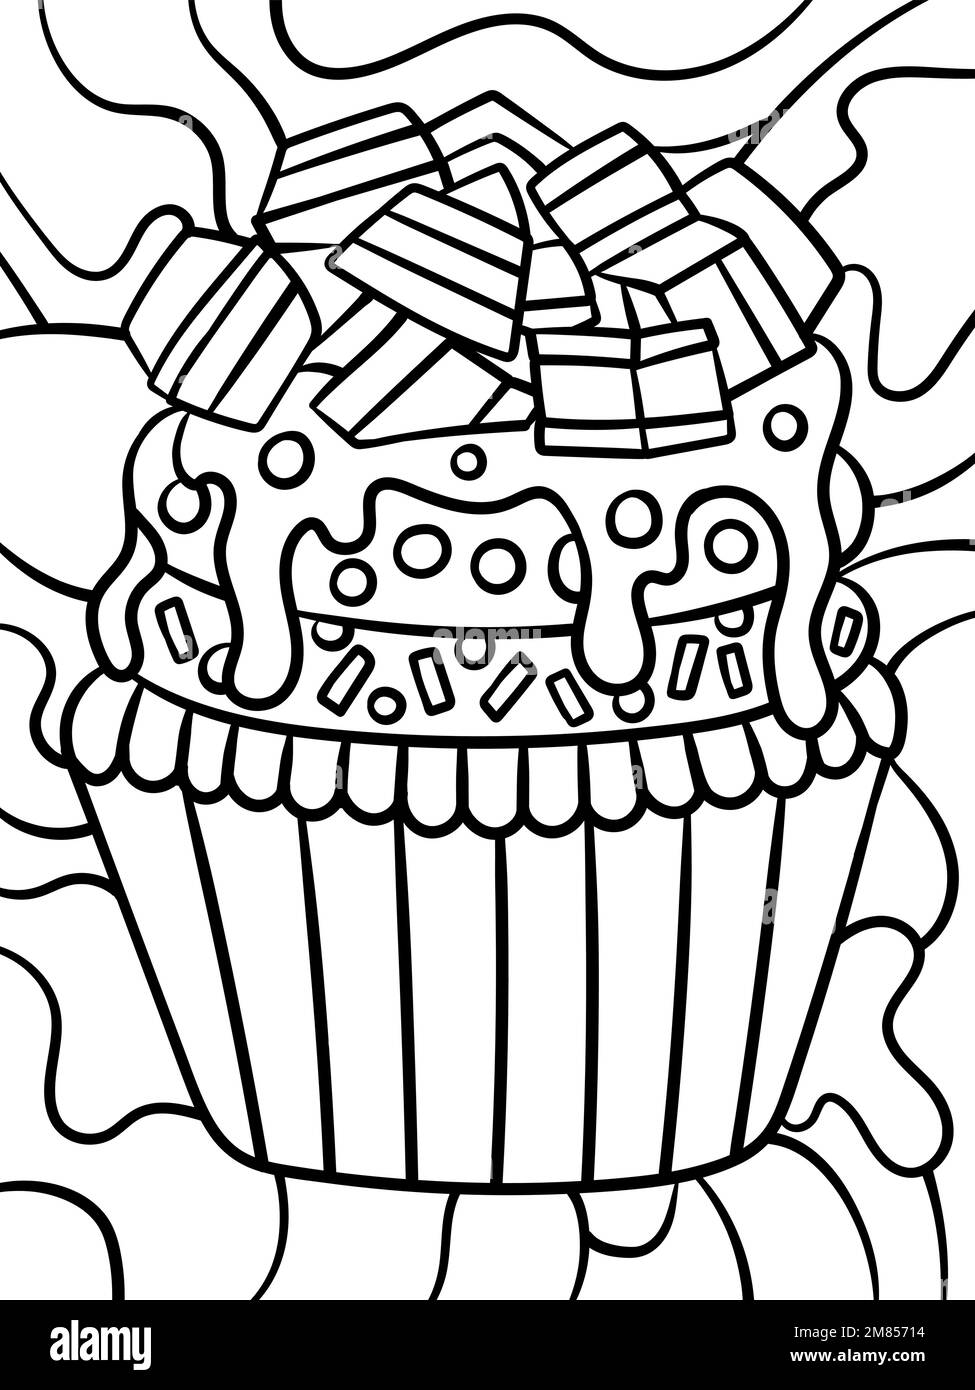 Sweet Muffin With Toppings Food Coloring Page  Stock Vector